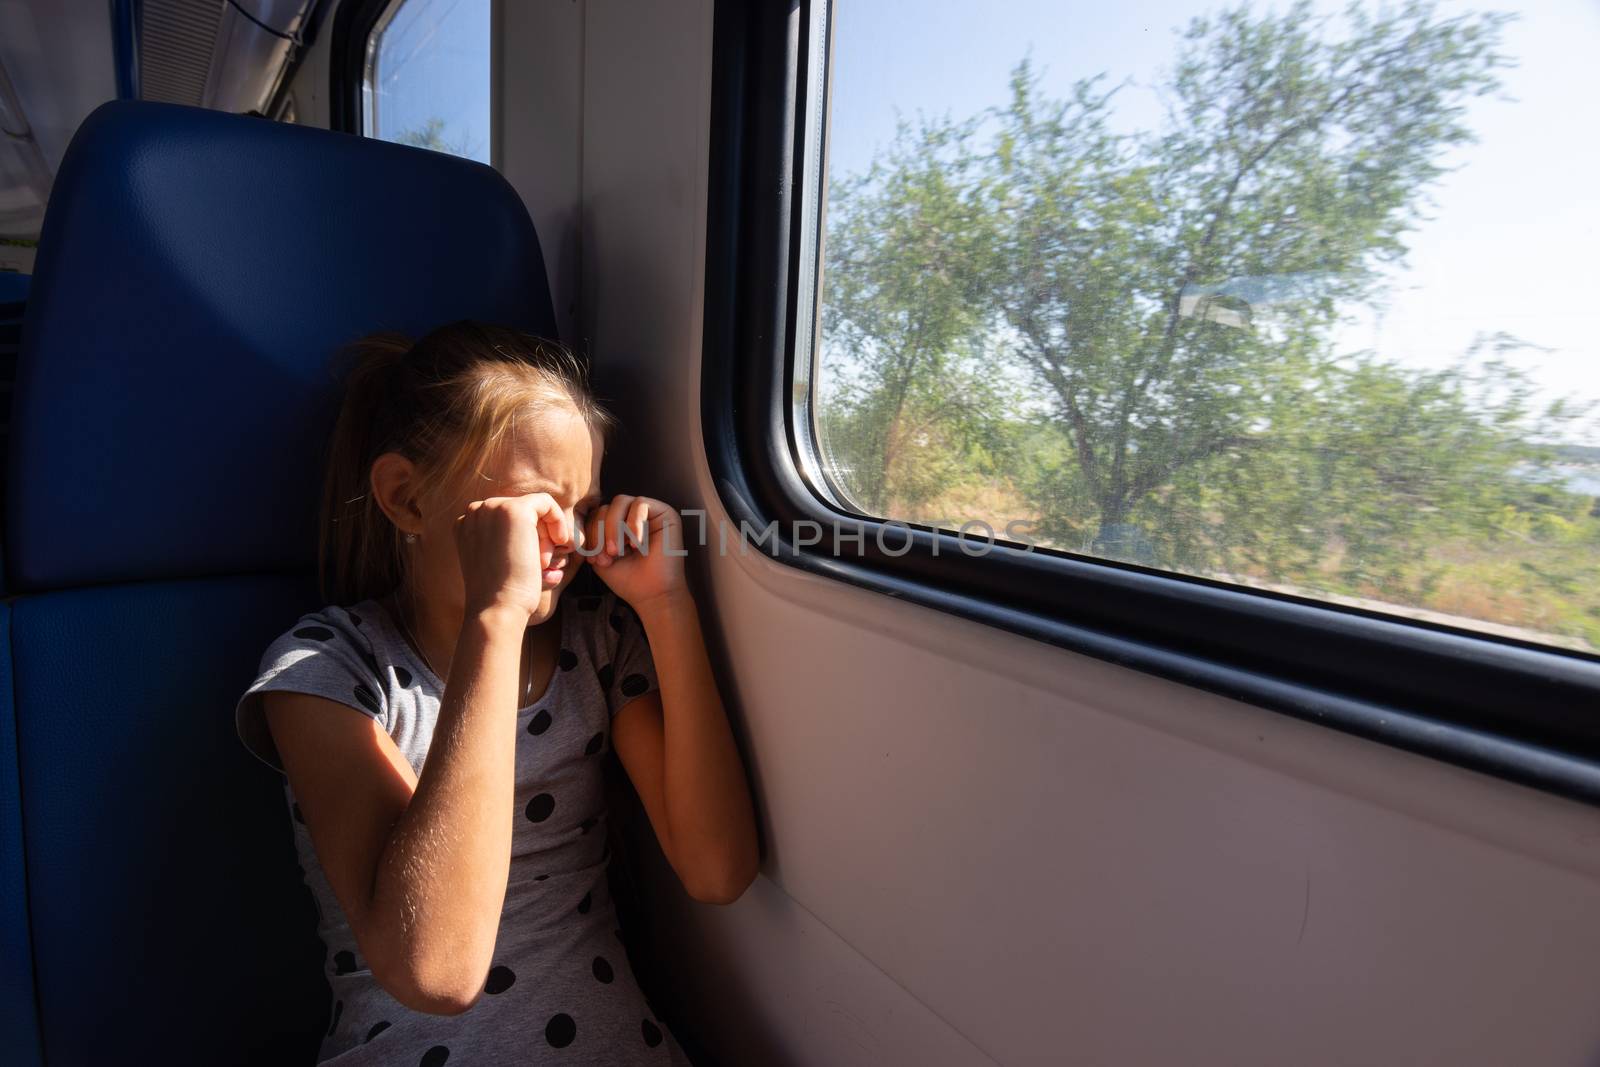 A girl rubs her eyes from the sun in an electric train car